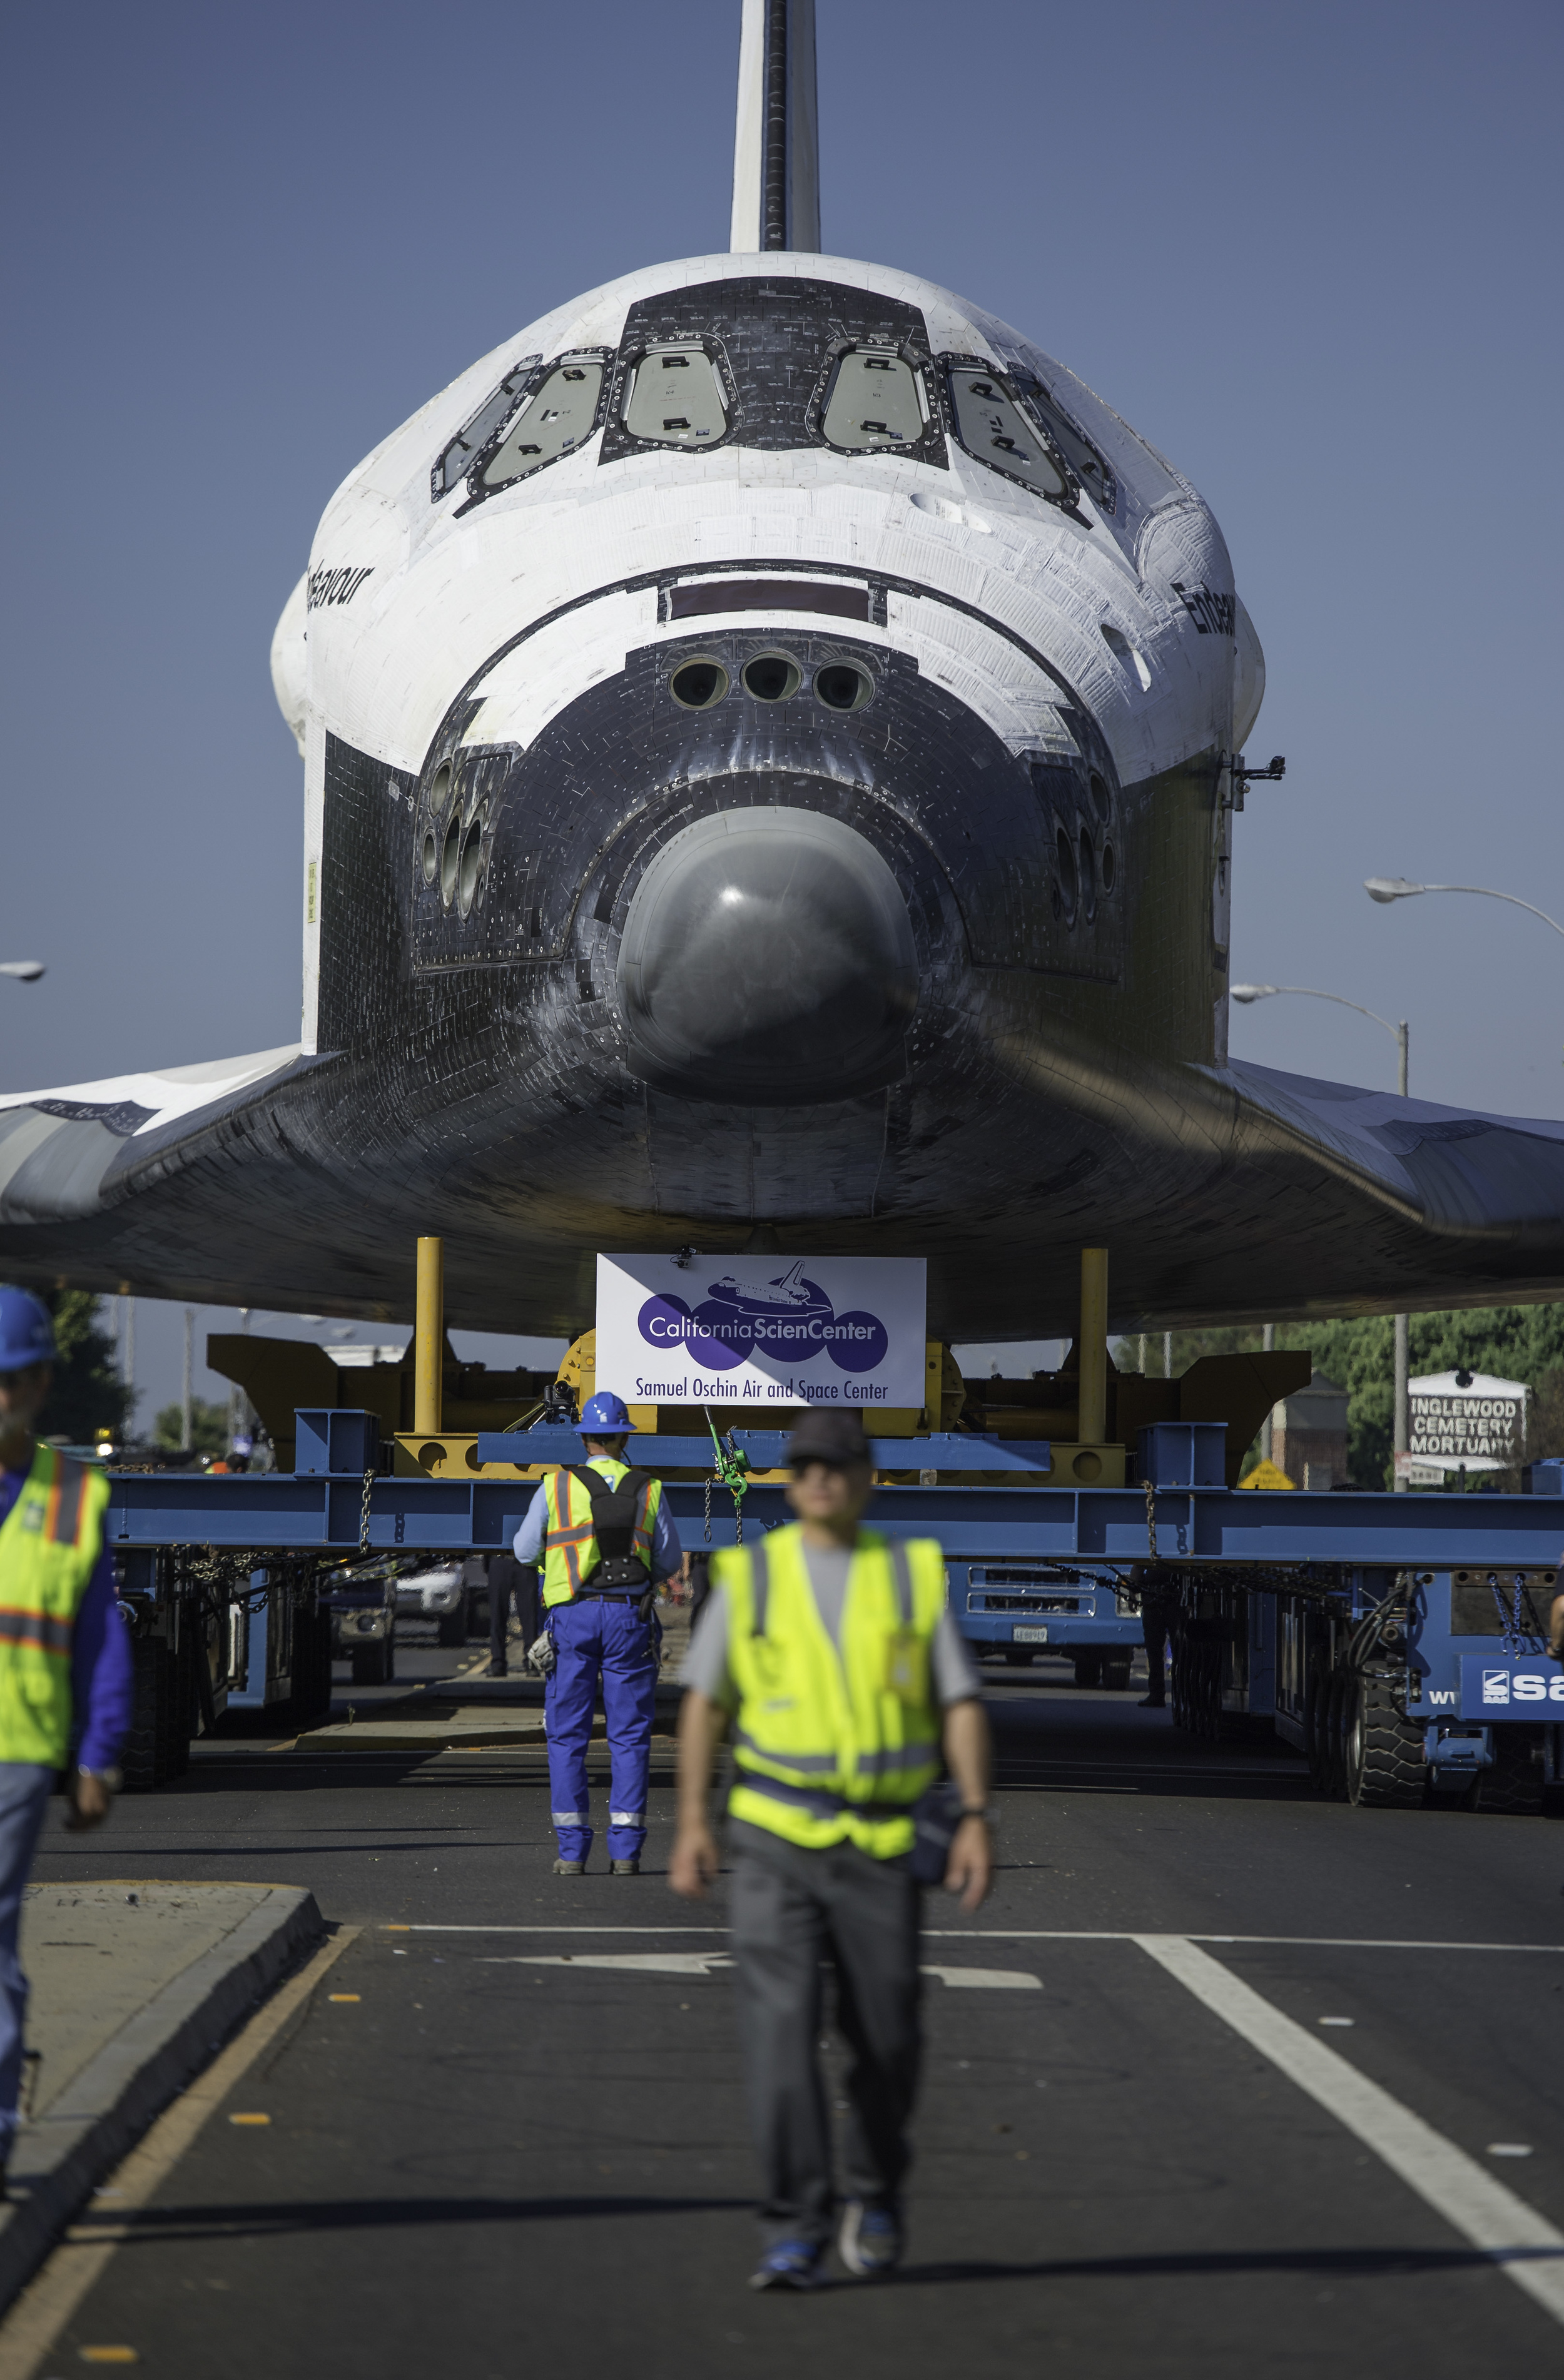  The space shuttle Endeavour is seen as it is maneuvered through the streets of Inglewood on its way to its new home at the California Science Center, Saturday, Oct. 13, 2012. Endeavour, built as a replacement for space shuttle Challenger, completed 